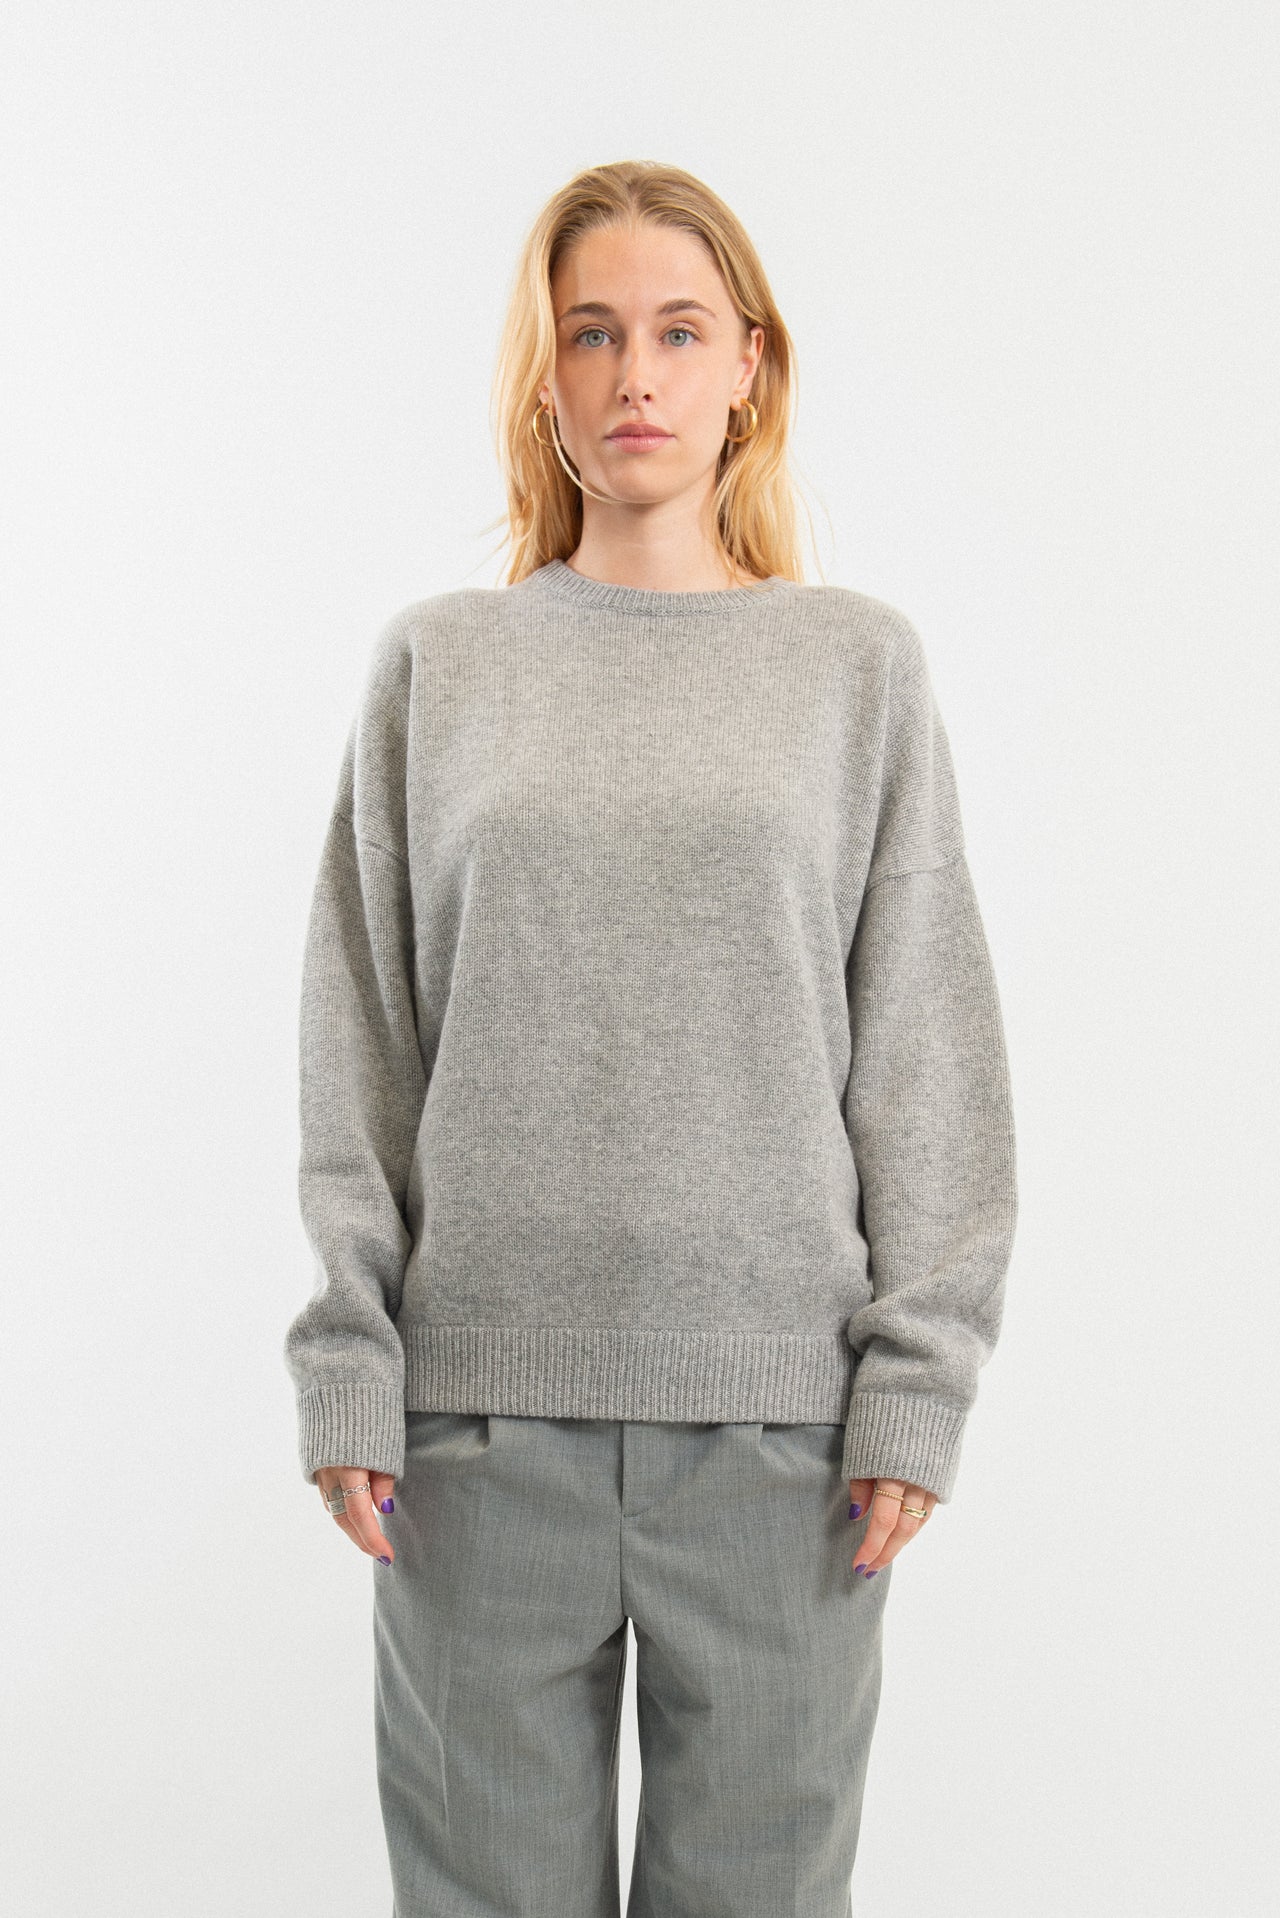 100% Cashmere round-neck sweater with a relaxed fit